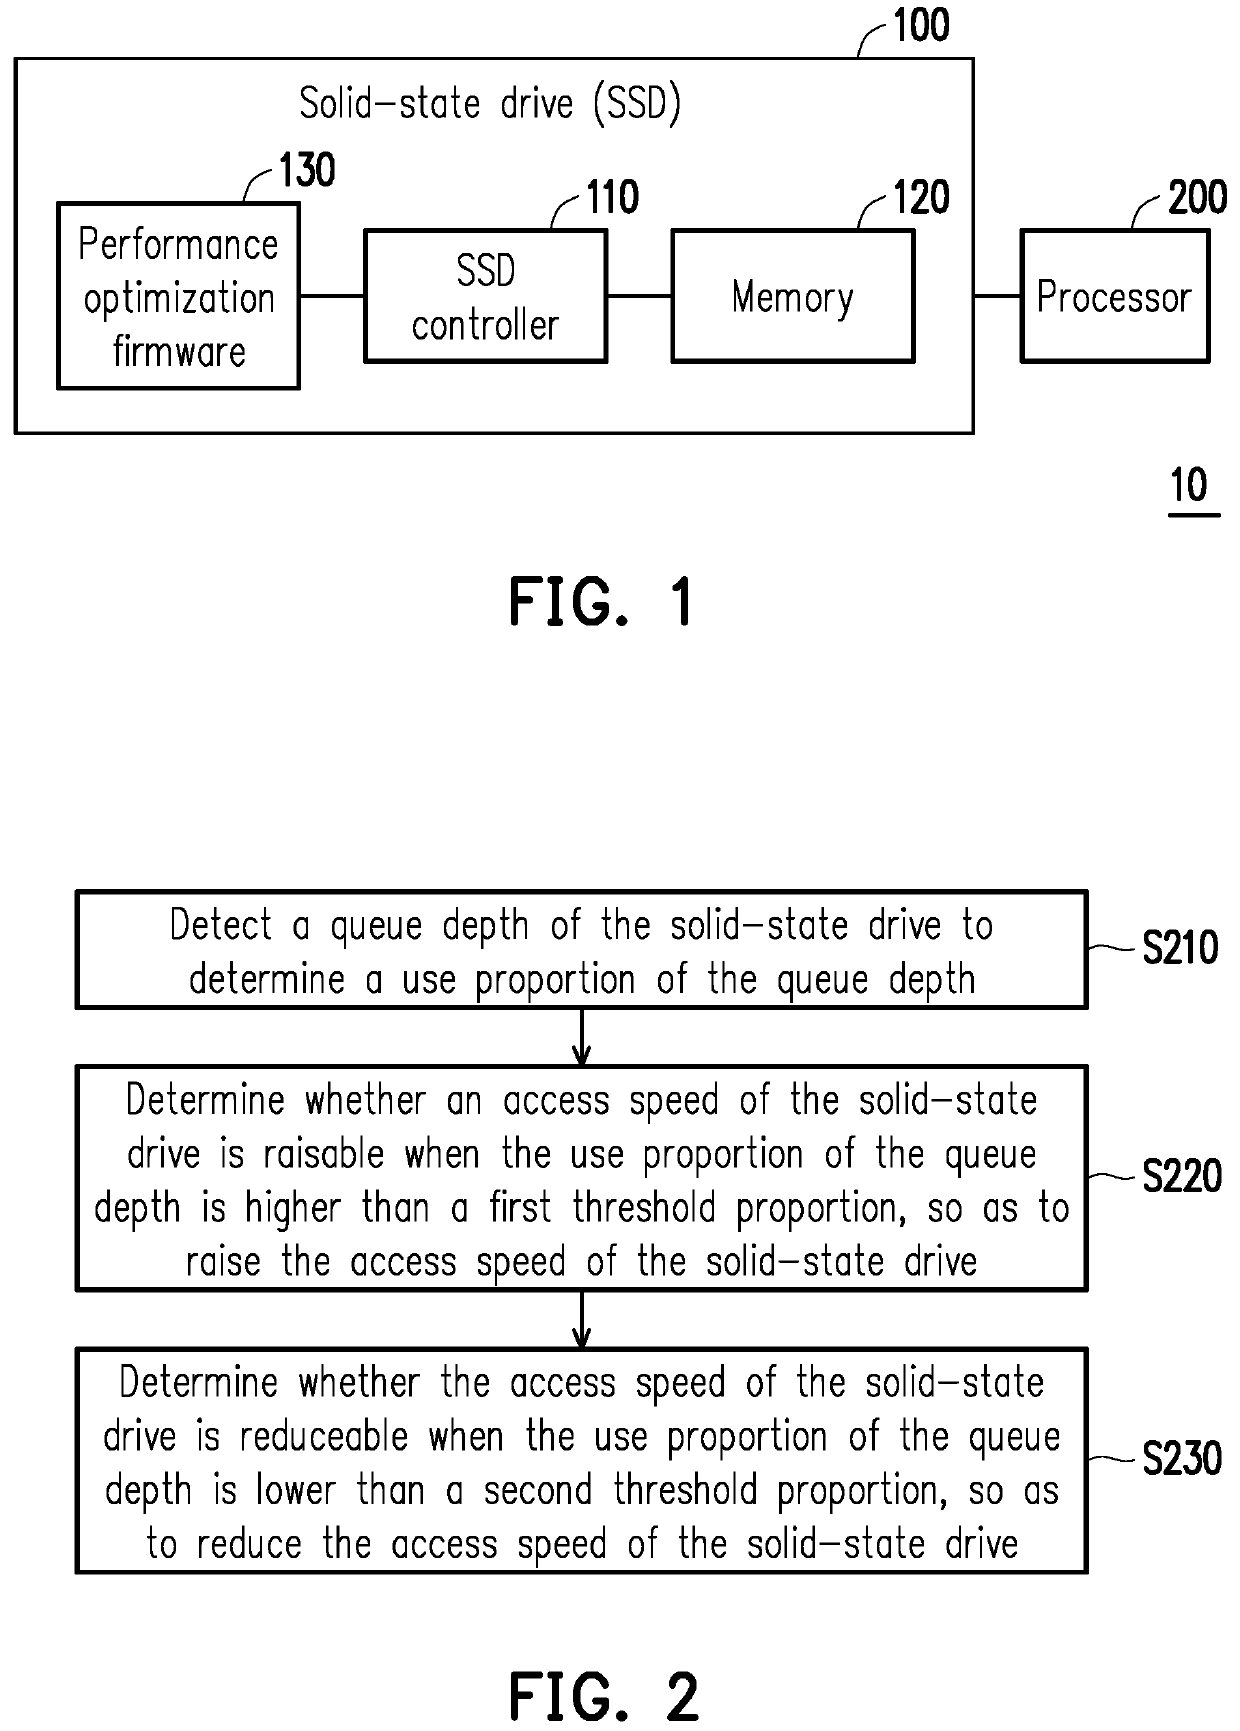 Solid-state drive and performance optimization method for solid-state drive